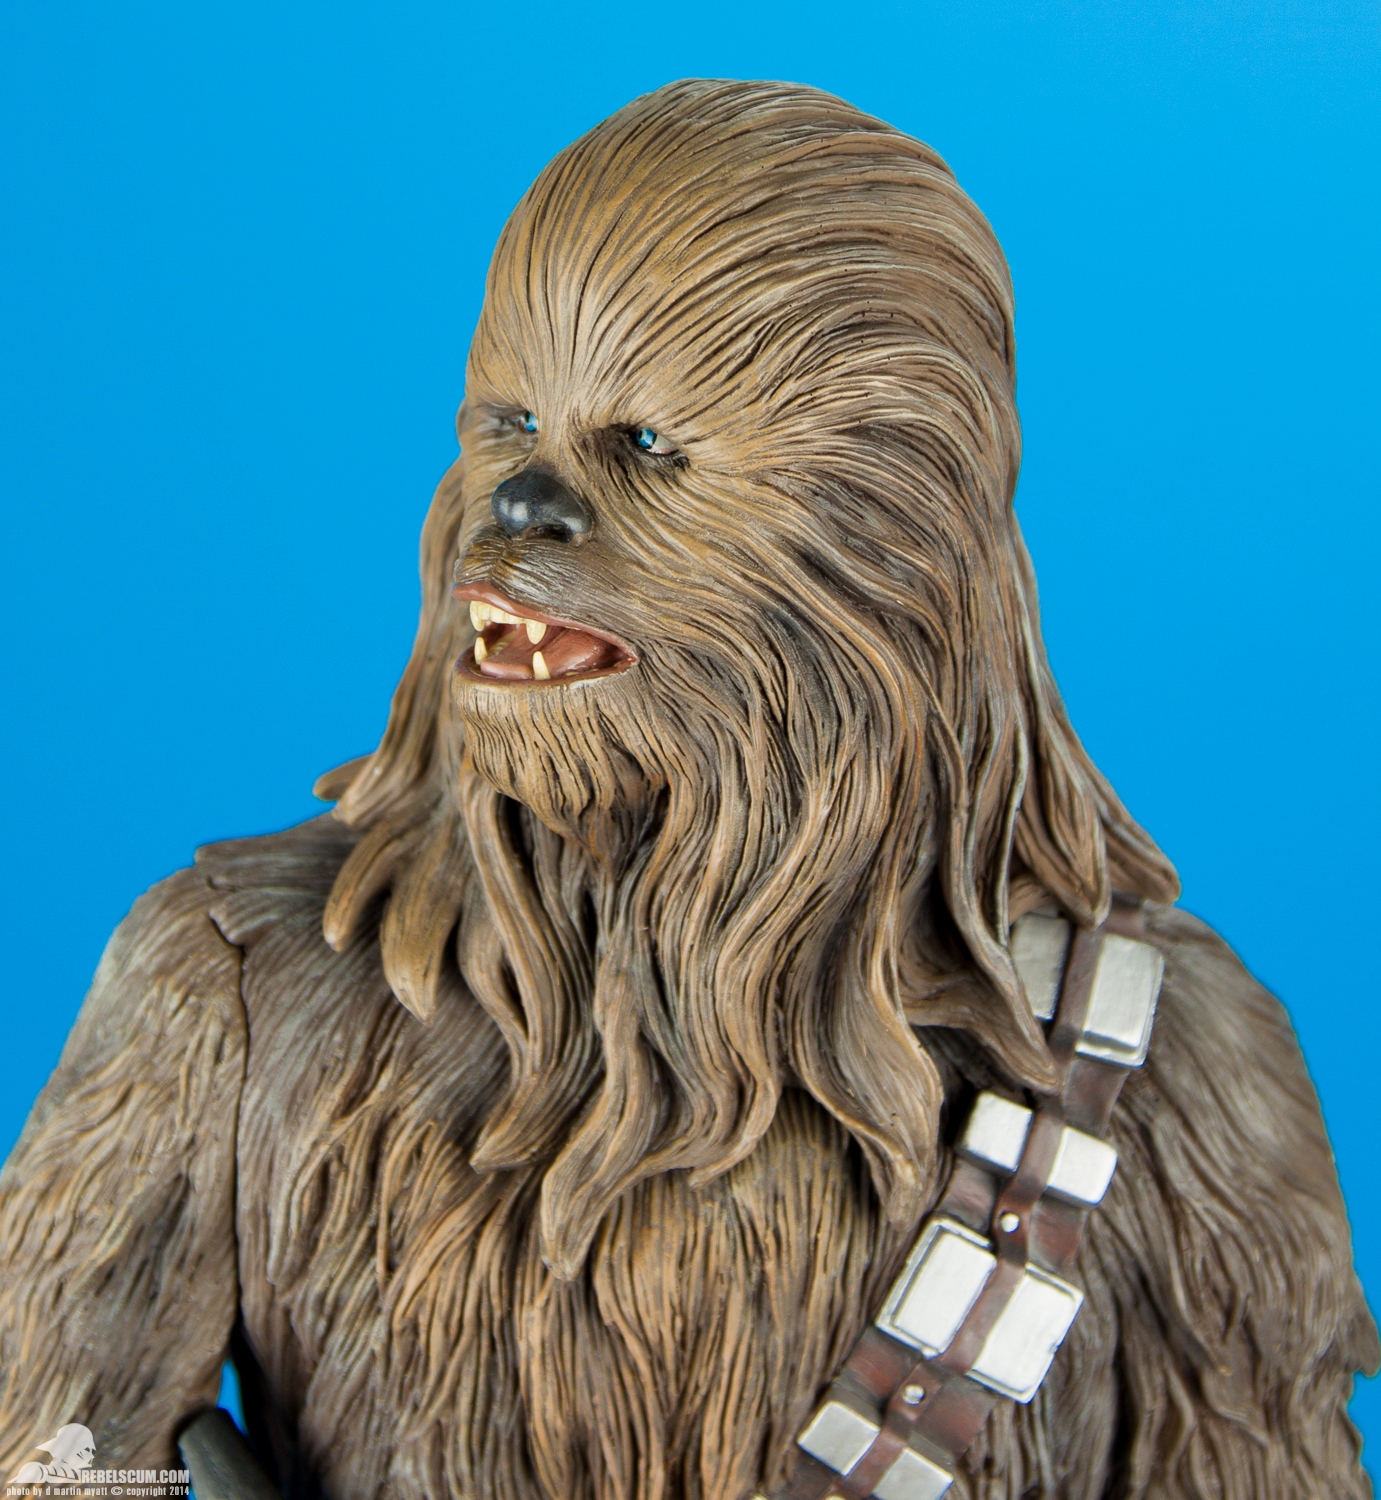 Chewbacca-Premium-Format-Figure-Sideshow-Collectibles-Exclusive-011.jpg